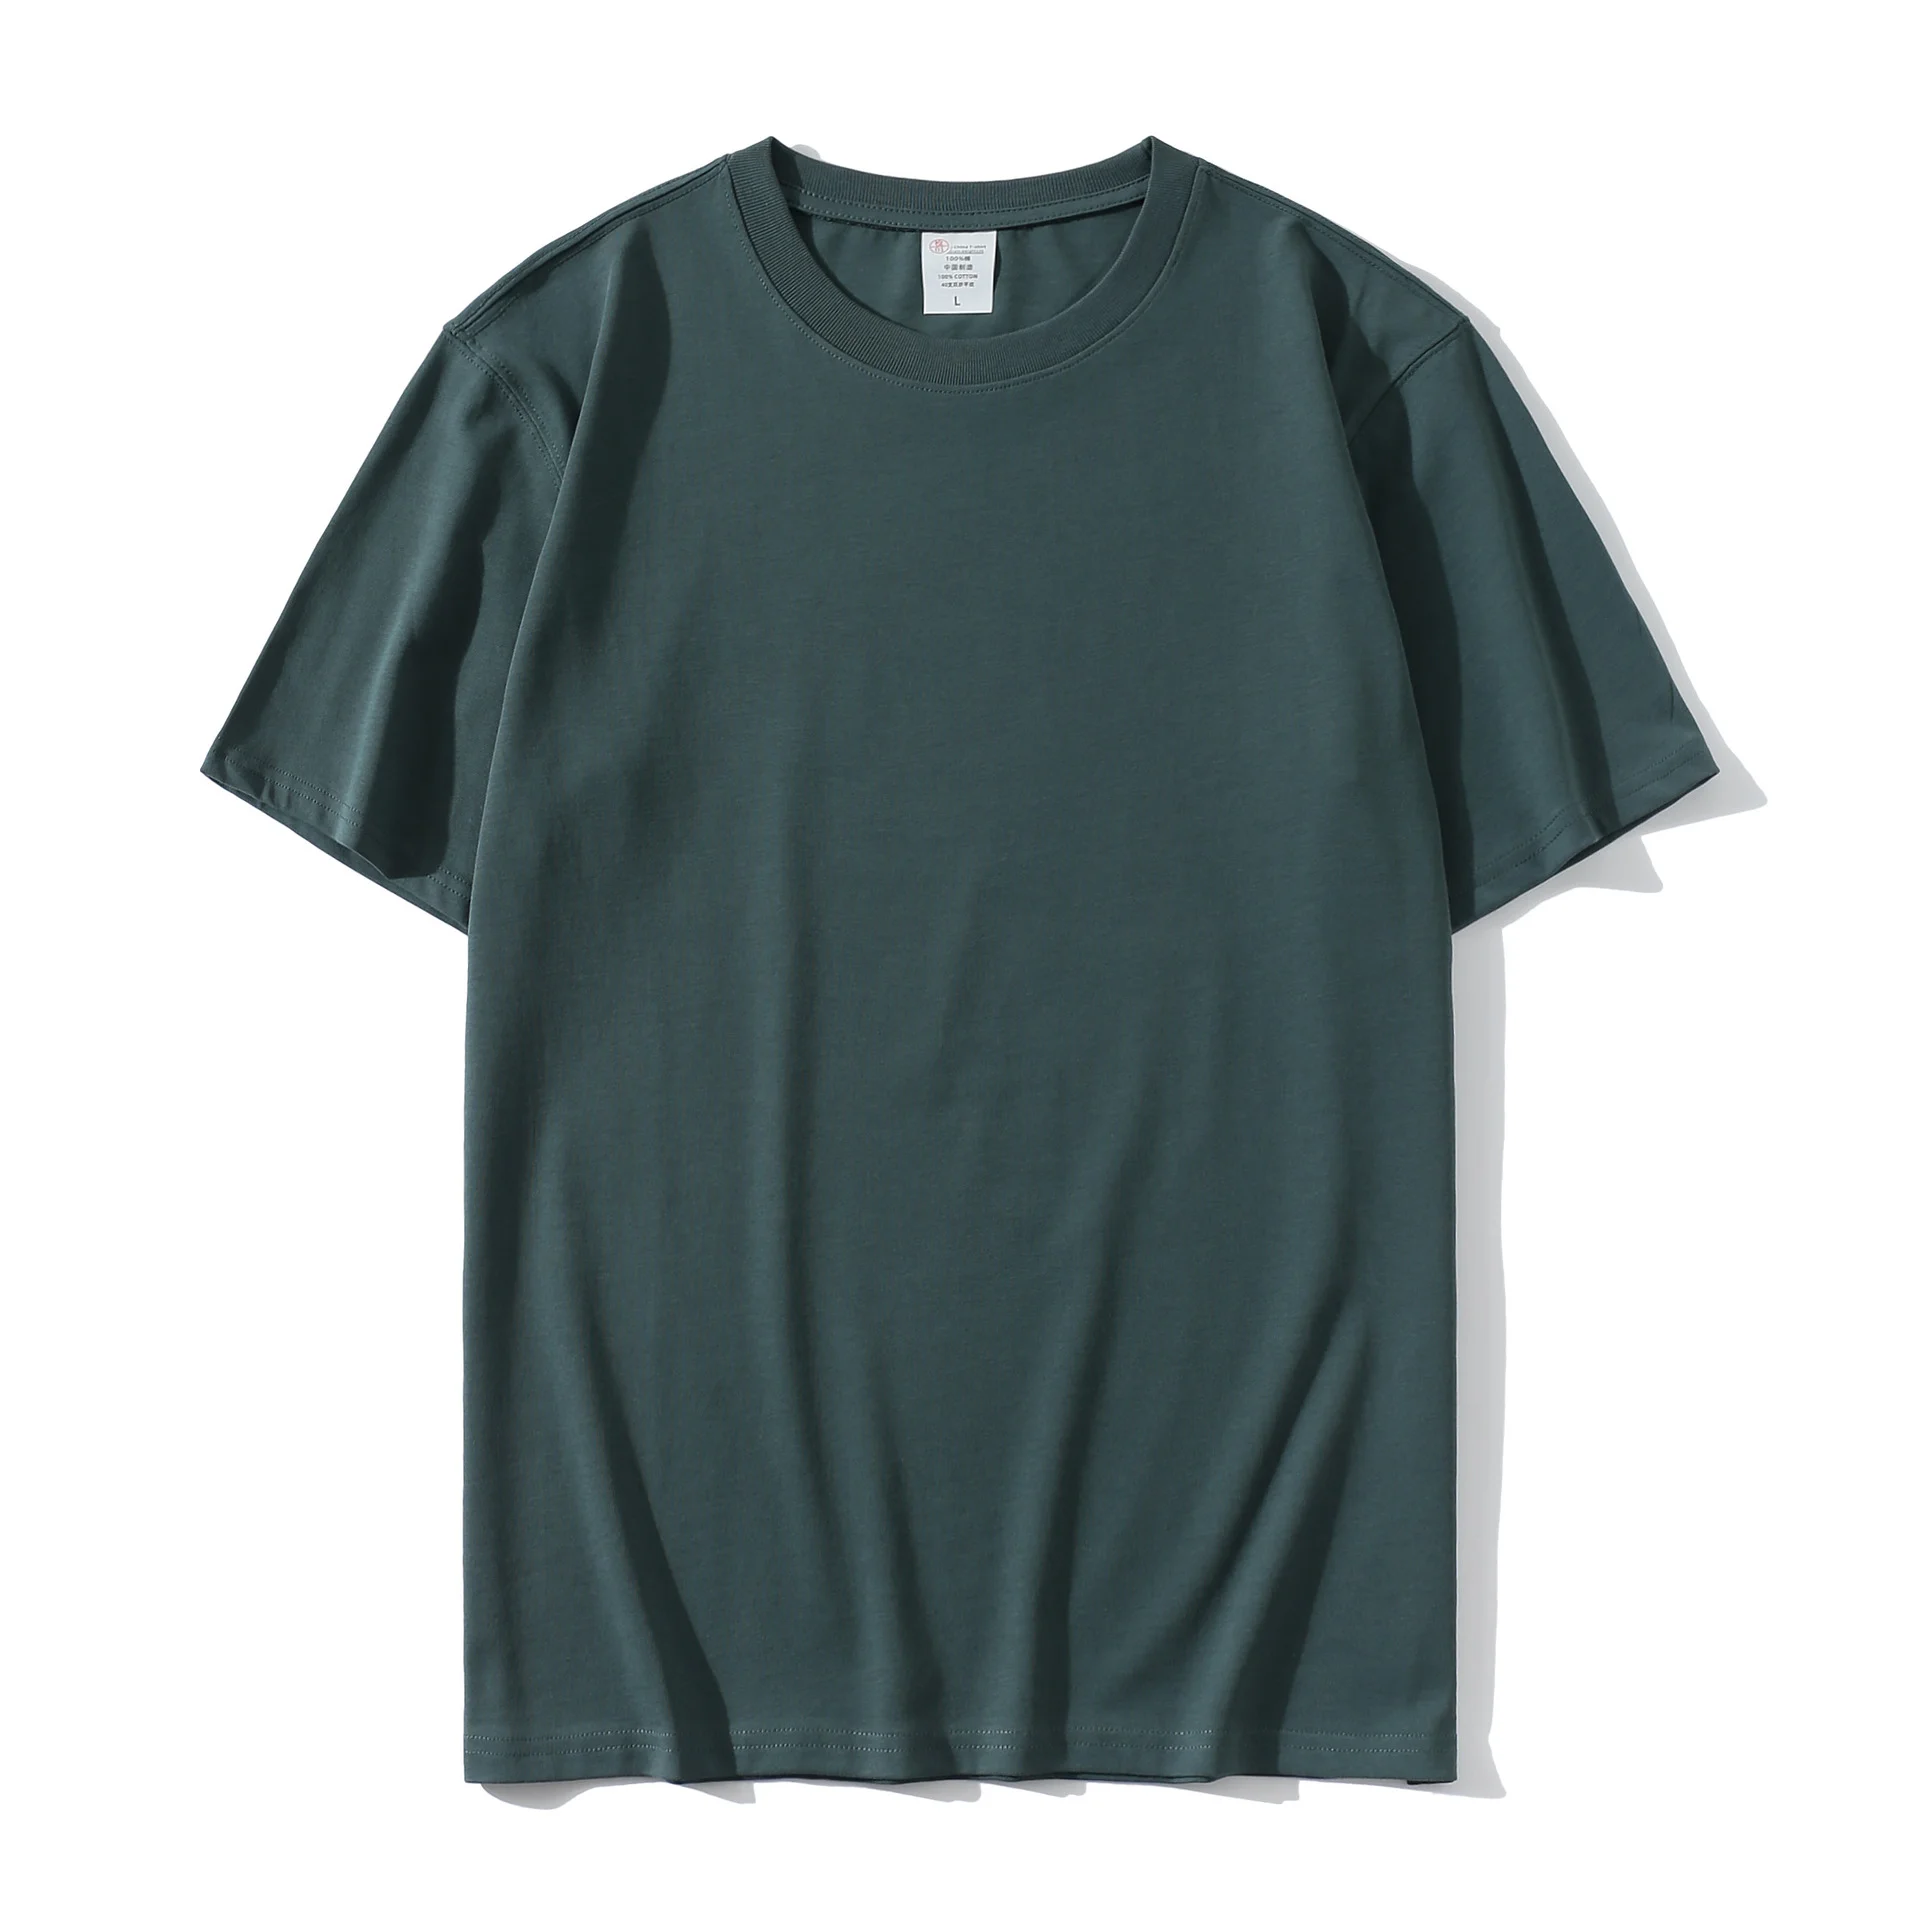 Wholesale Blank T shirts for Printing in Tomsk